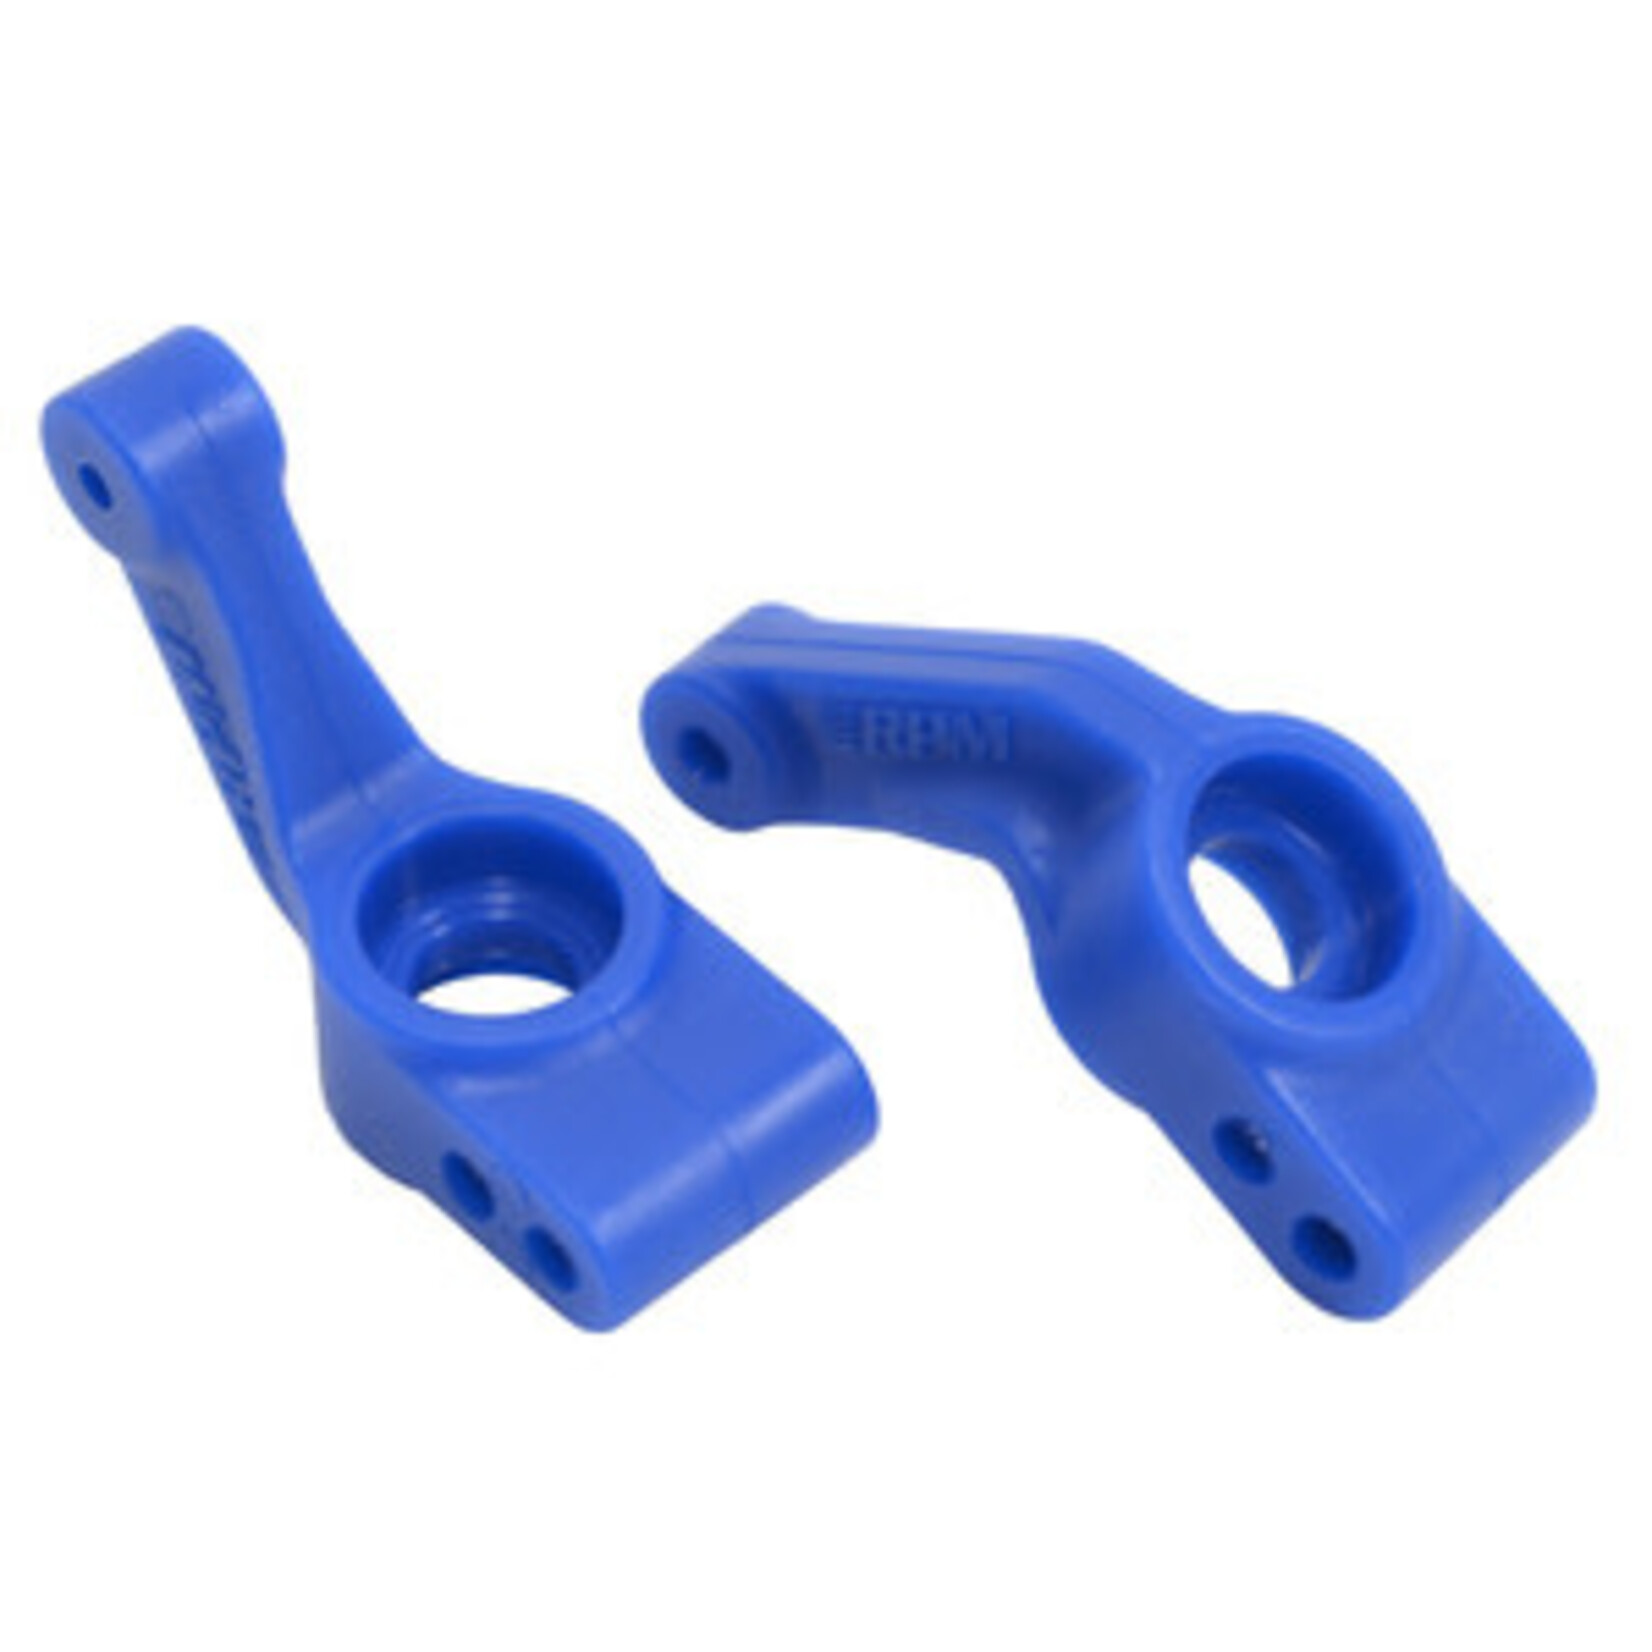 RPM Rear Bearing Carriers, for Traxxas Slash 2wd & Bandit, Blue